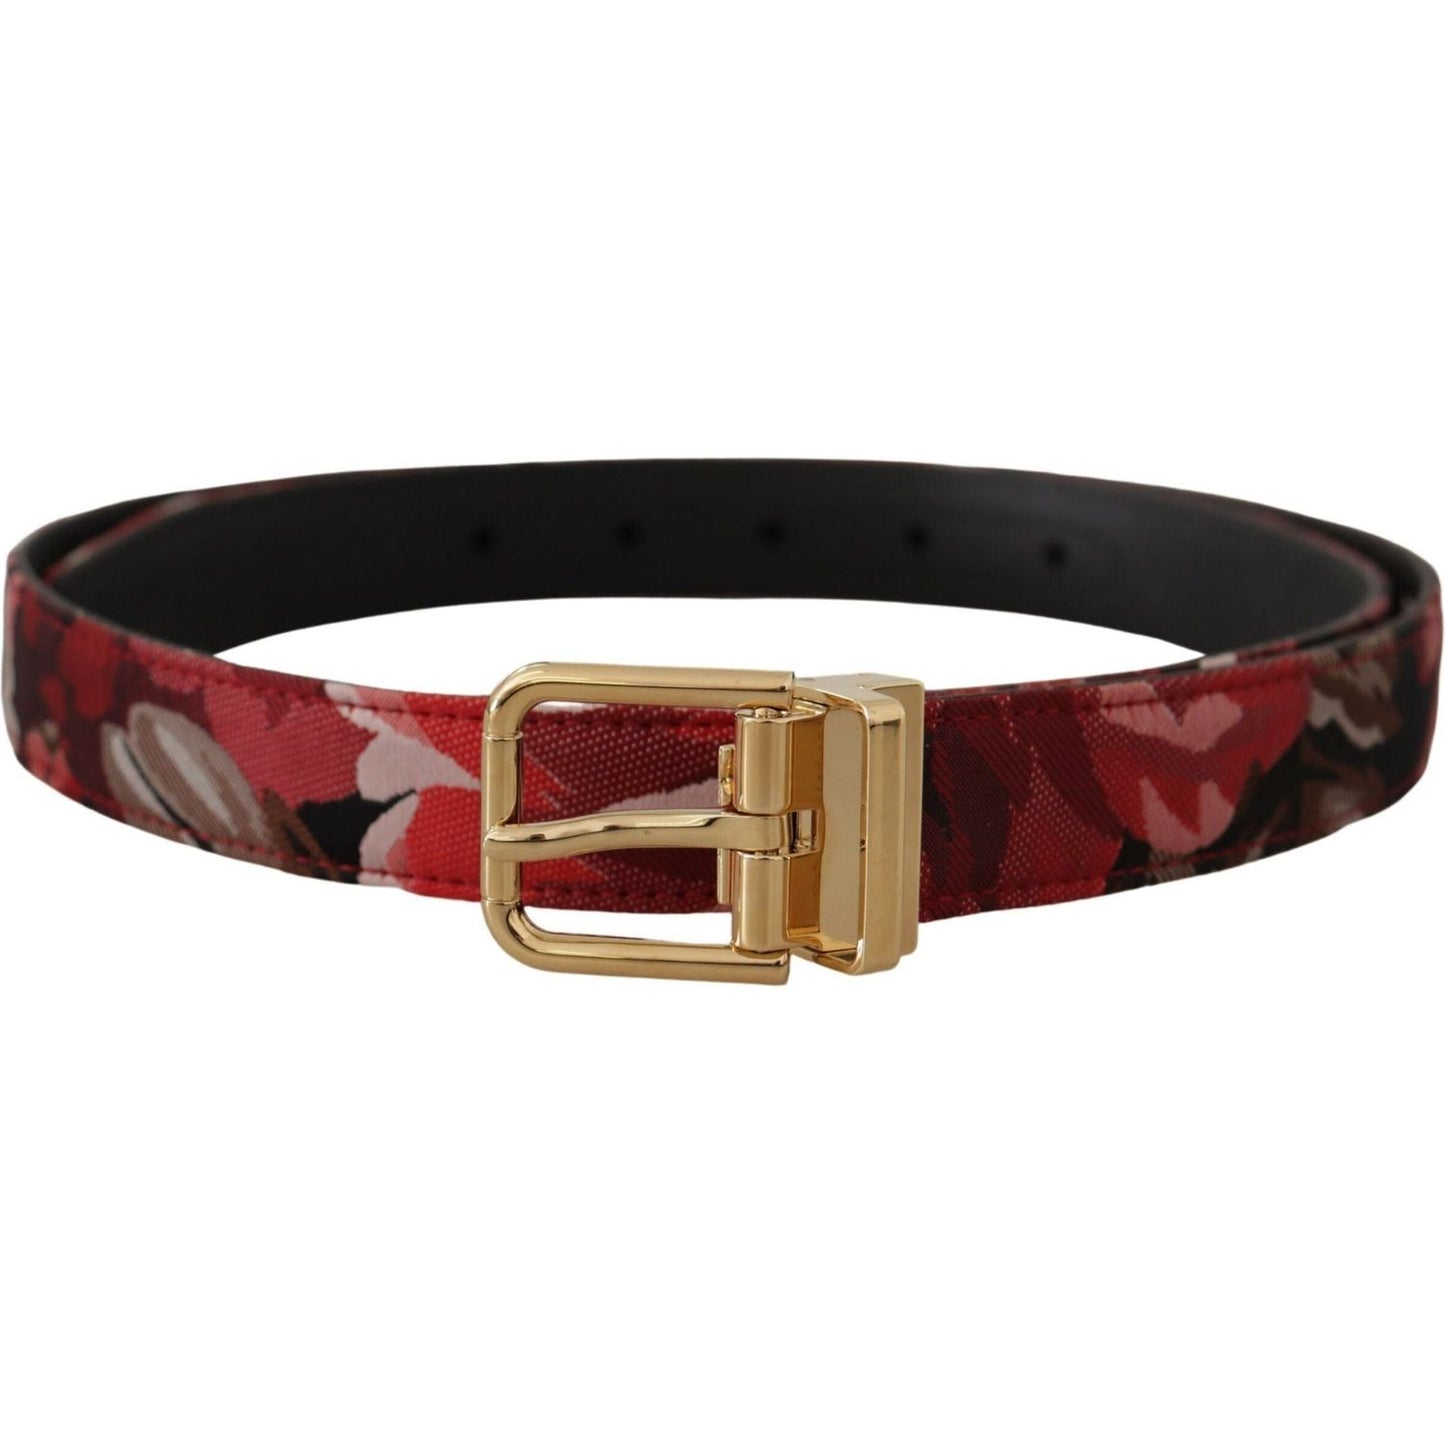 Dolce & Gabbana Red Multicolor Leather Belt with Gold-Tone Buckle red-jacquard-rose-leather-gold-metal-buckle-belt IMG_7805-1-scaled-cd521f46-53a.jpg